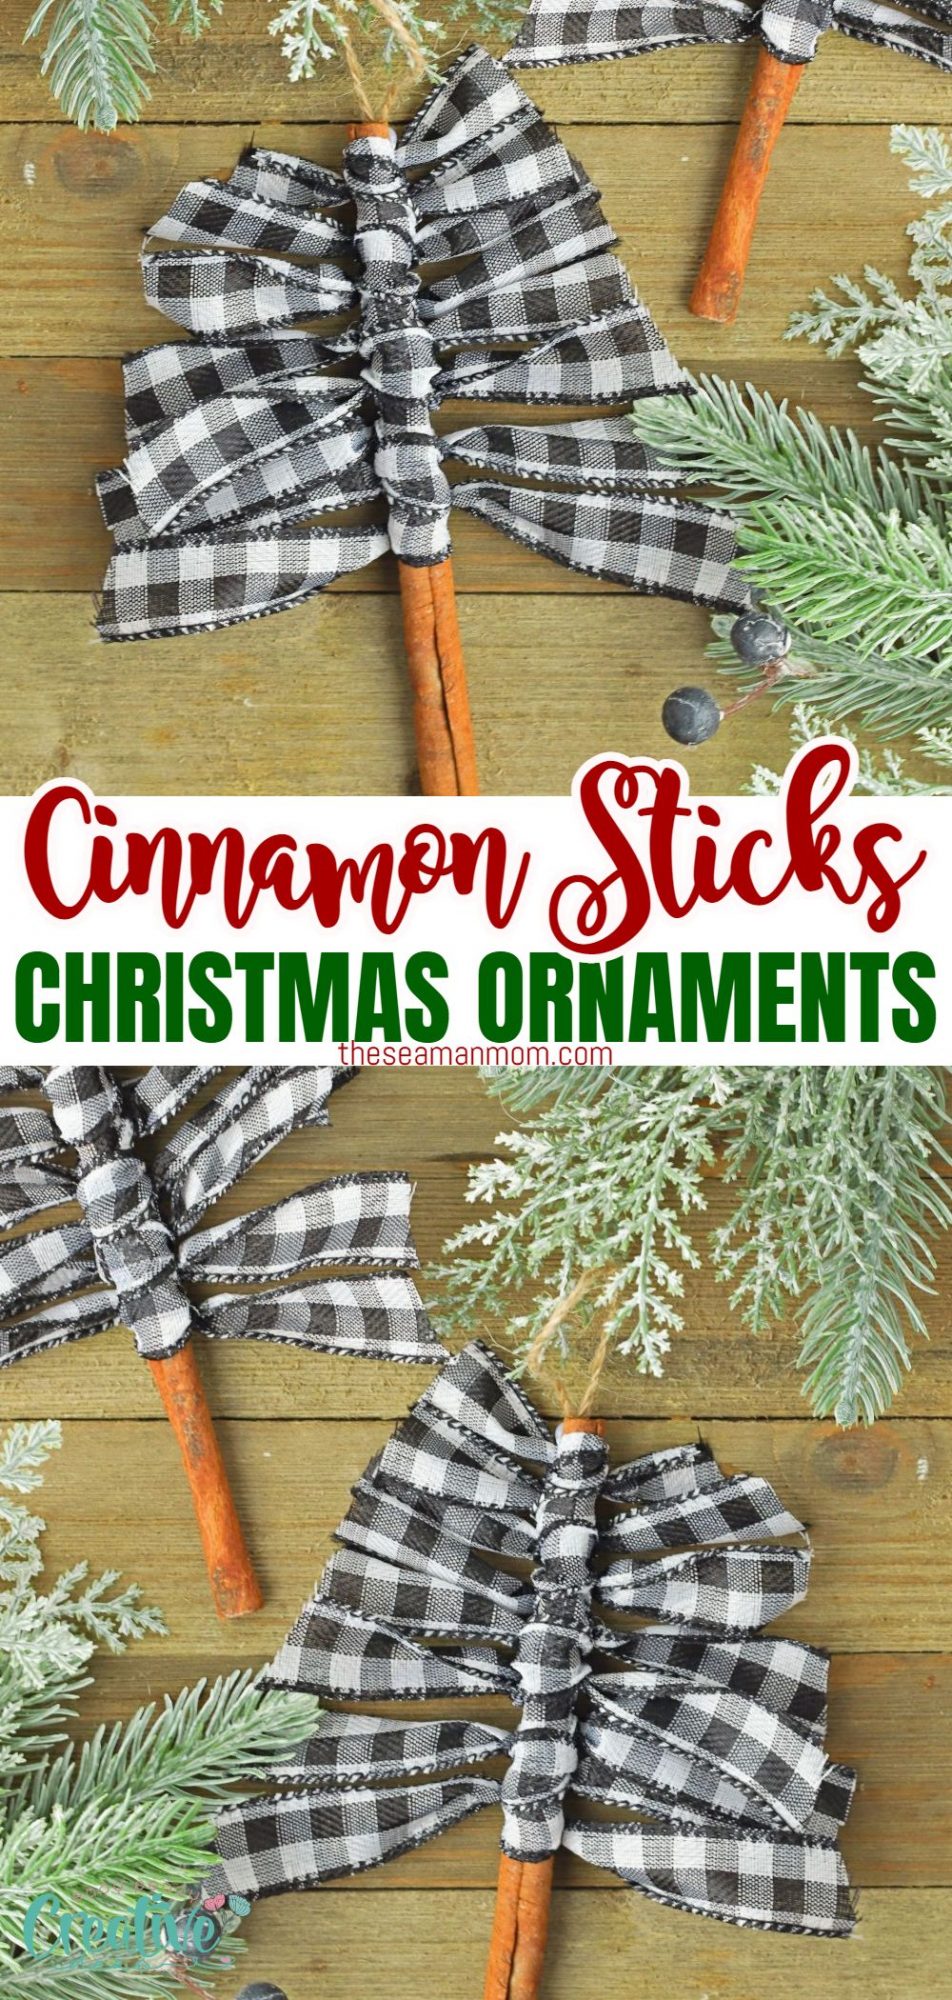 Photo collage of cinnamon stick ornaments to hang in a Christmas tree